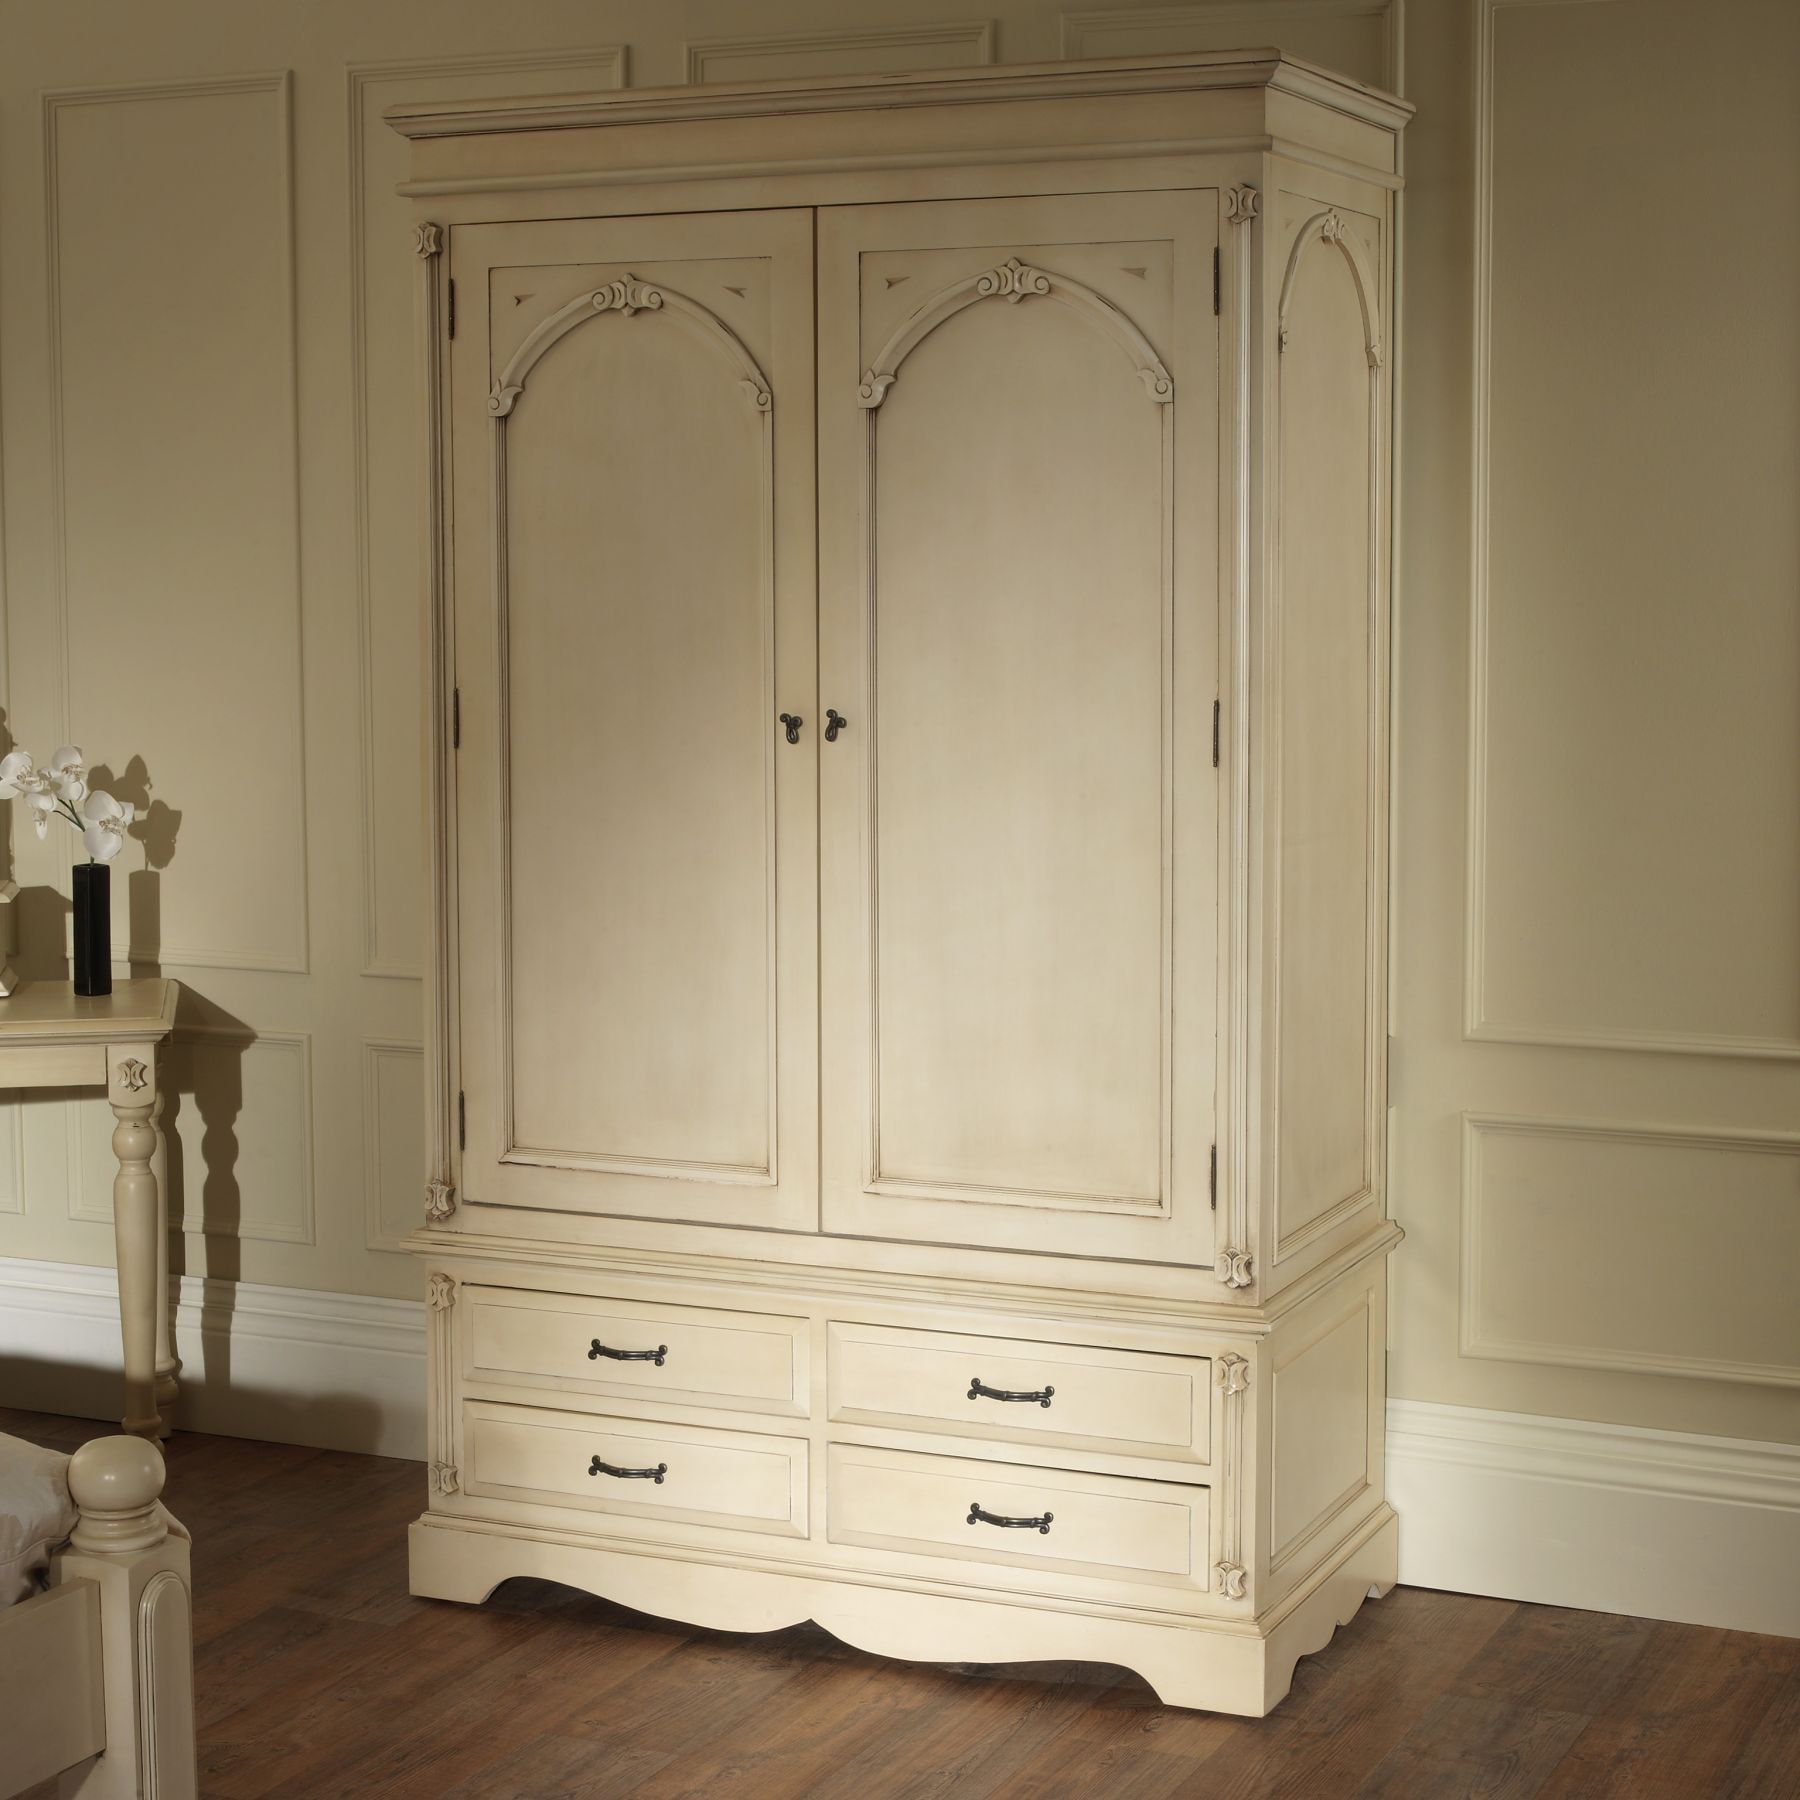 Victorian Antique French Wardrobe Works Well Alongside Our Shabby Chic  Furniture Intended For Victorian Style Wardrobes (Photo 2 of 15)